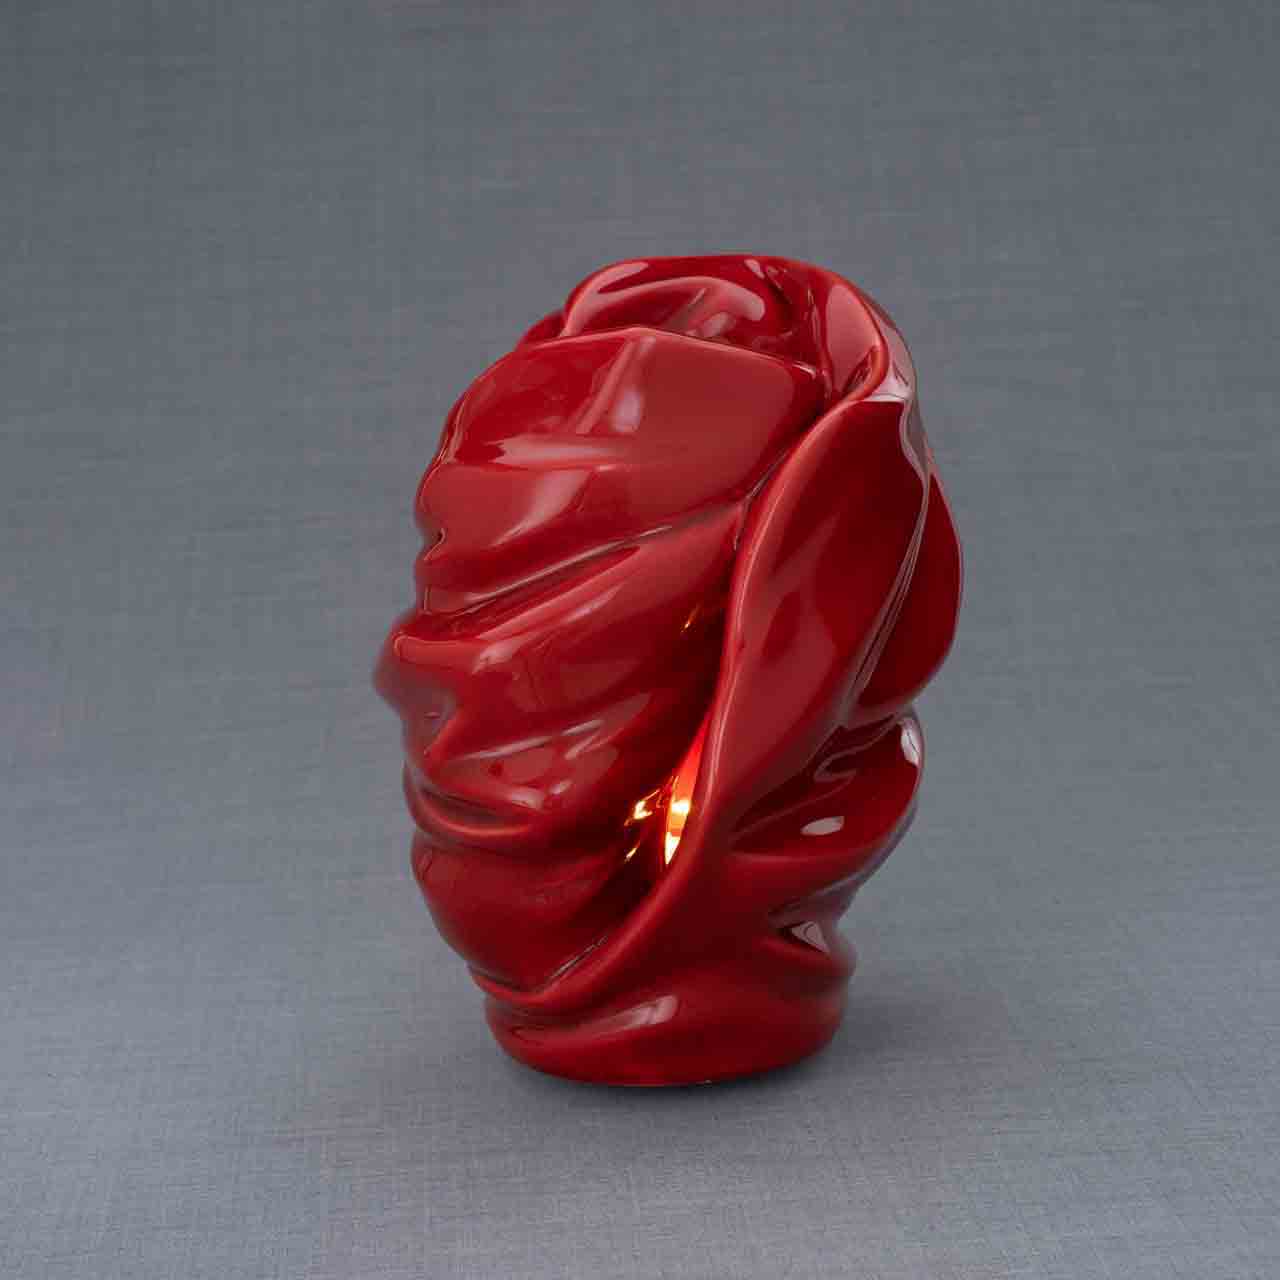 Light Adult Cremation Urn for Ashes in Red